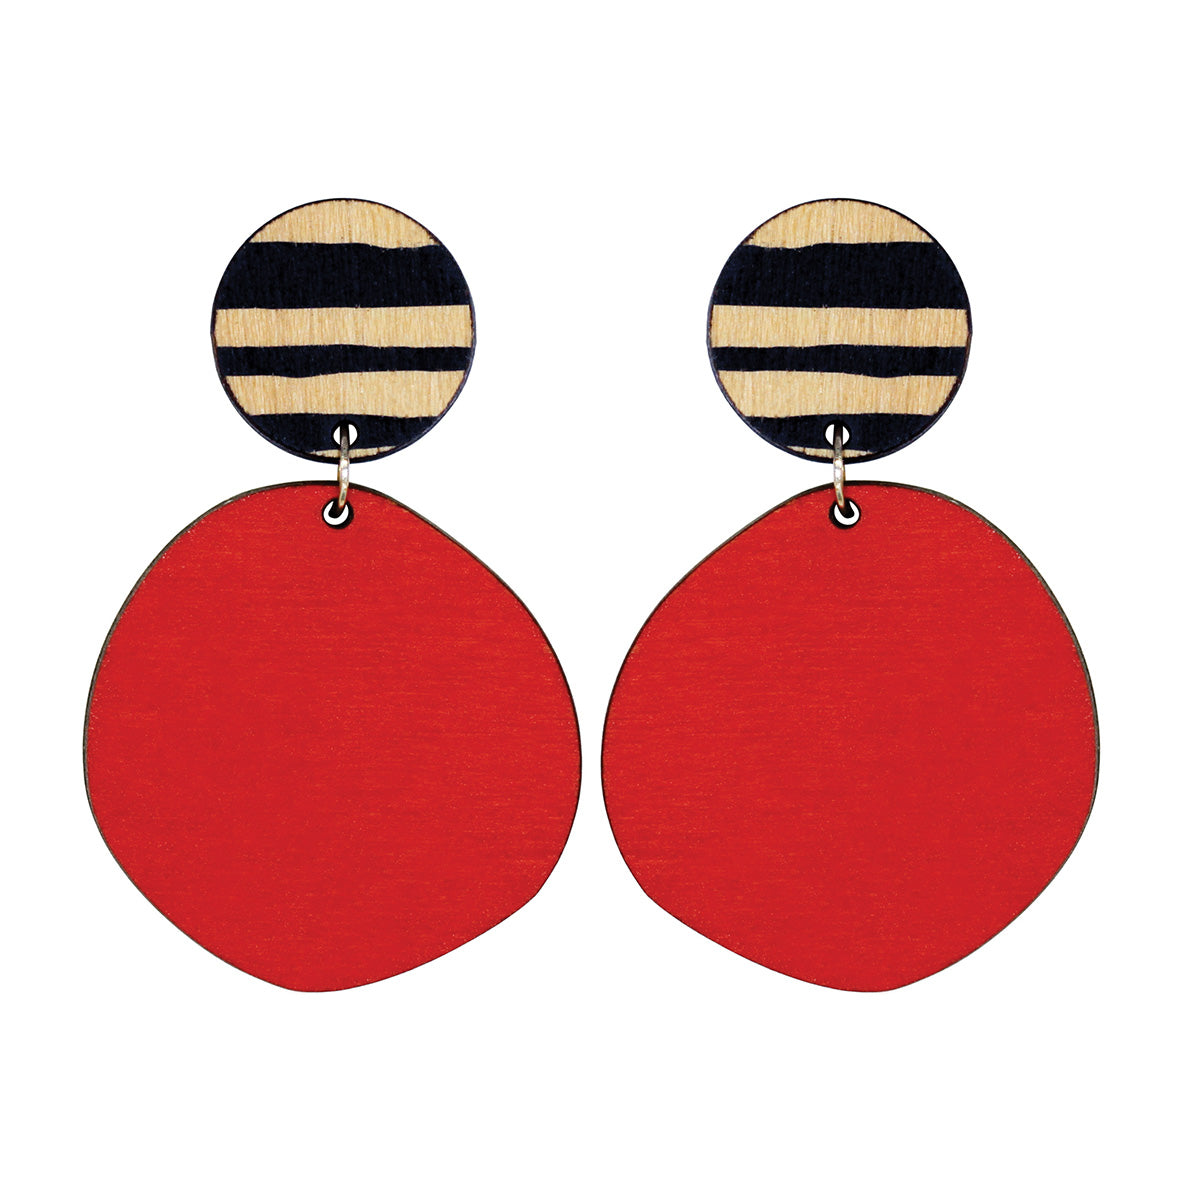 Retro wooden earrings in red with thick lines